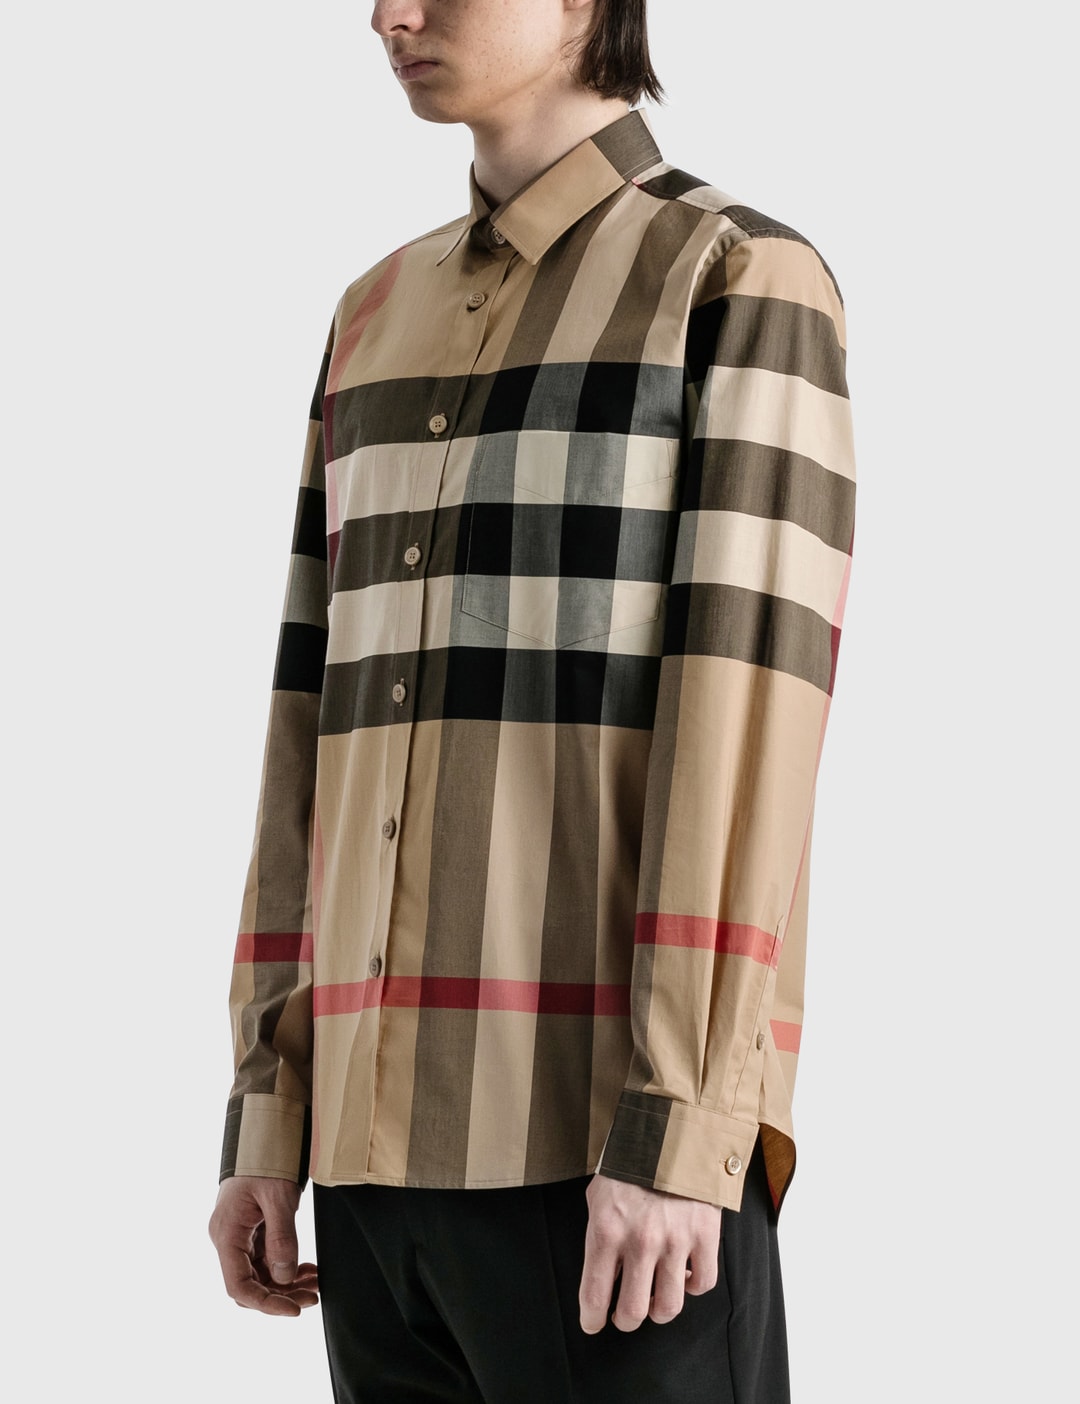 Burberry - Check Stretch Cotton Poplin Shirt | HBX - Globally Curated  Fashion and Lifestyle by Hypebeast